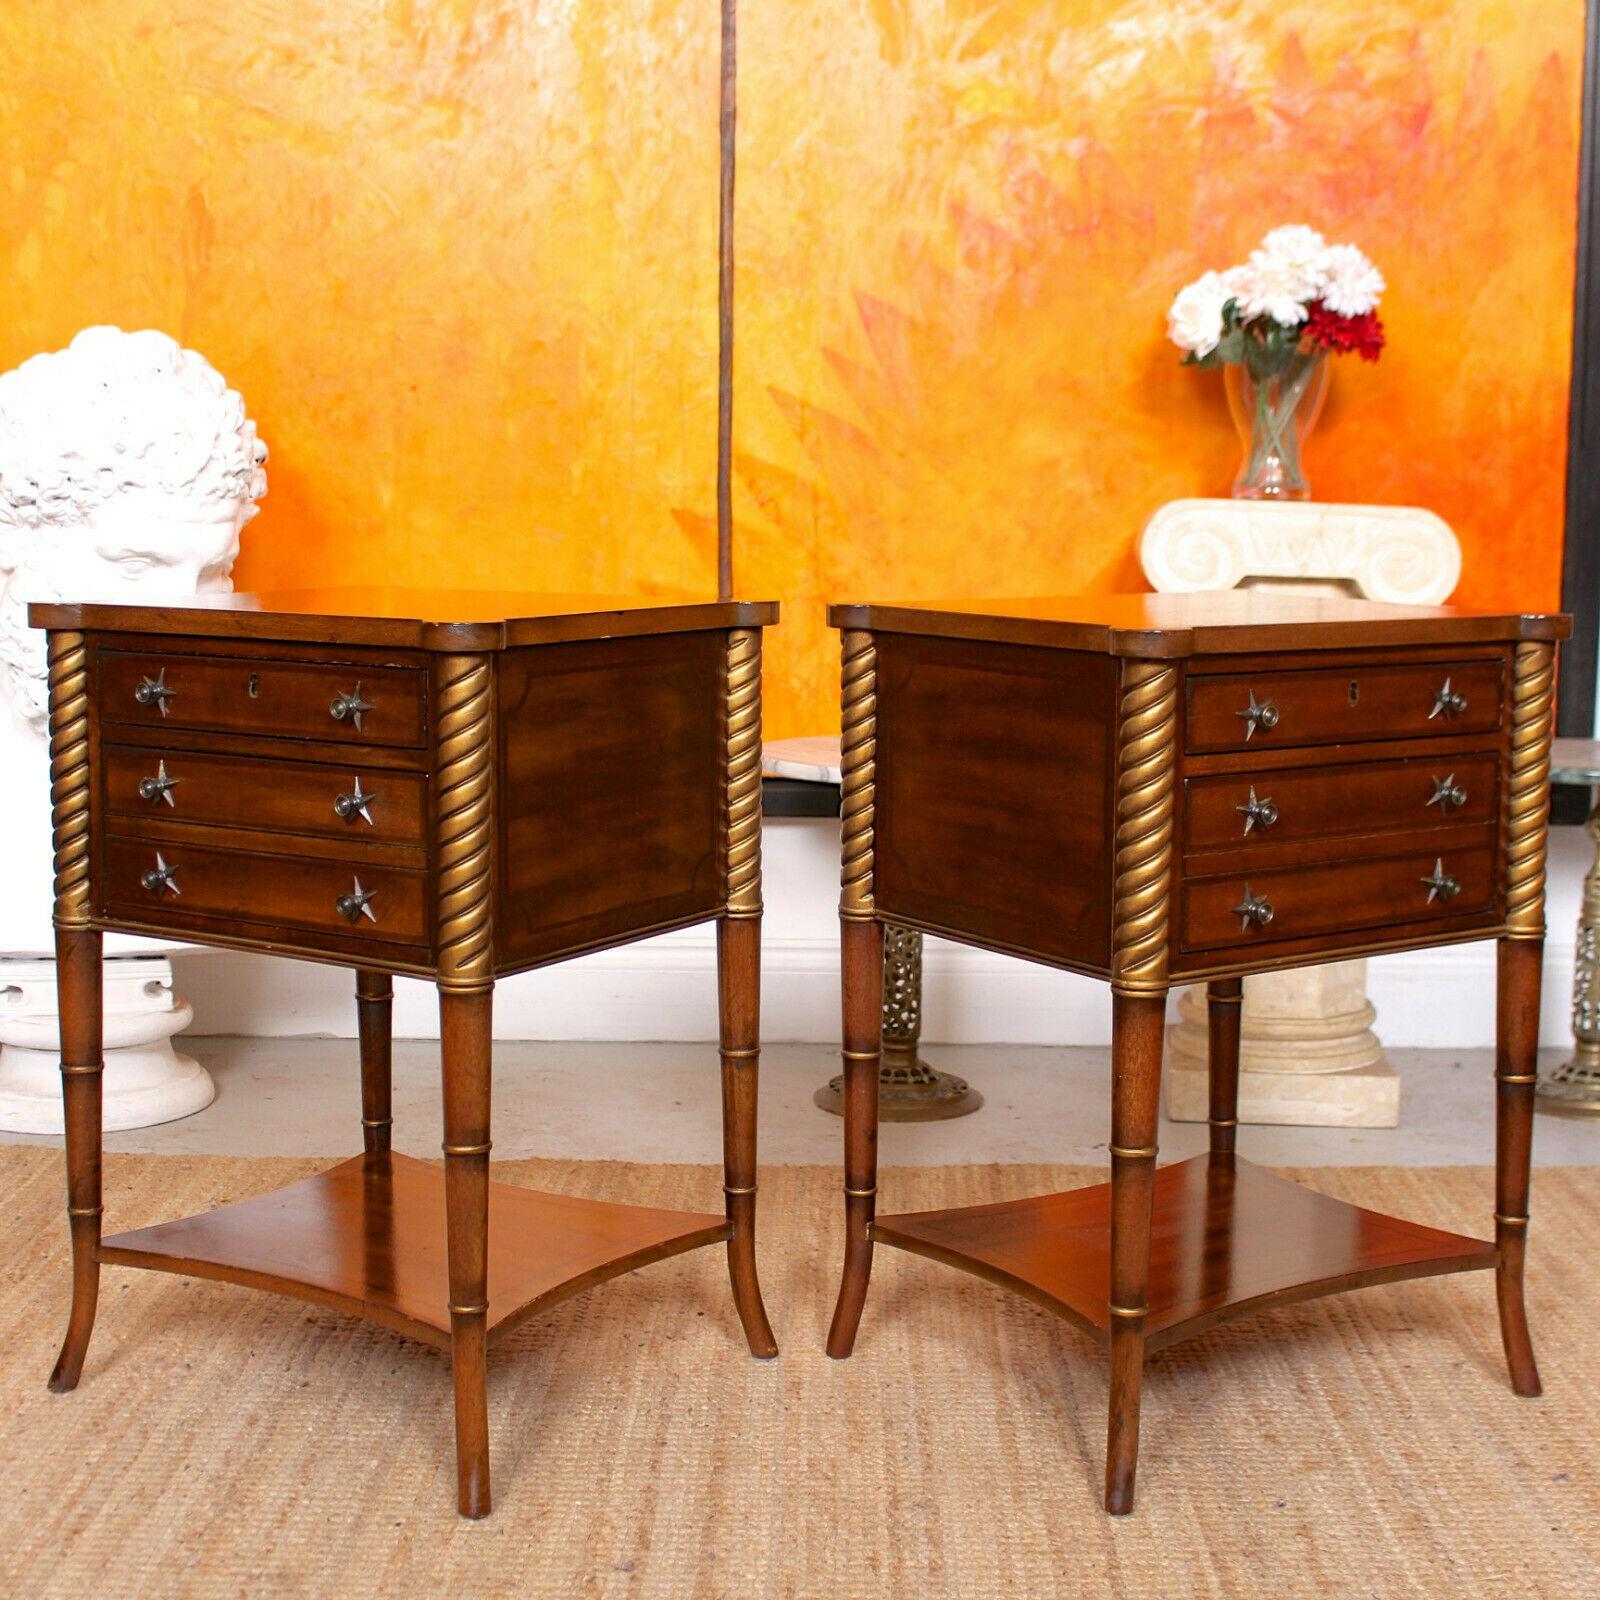 20th Century Pair of Side Tables Inlaid Mahogany Drexel Heritage Bedside Chest of Drawers